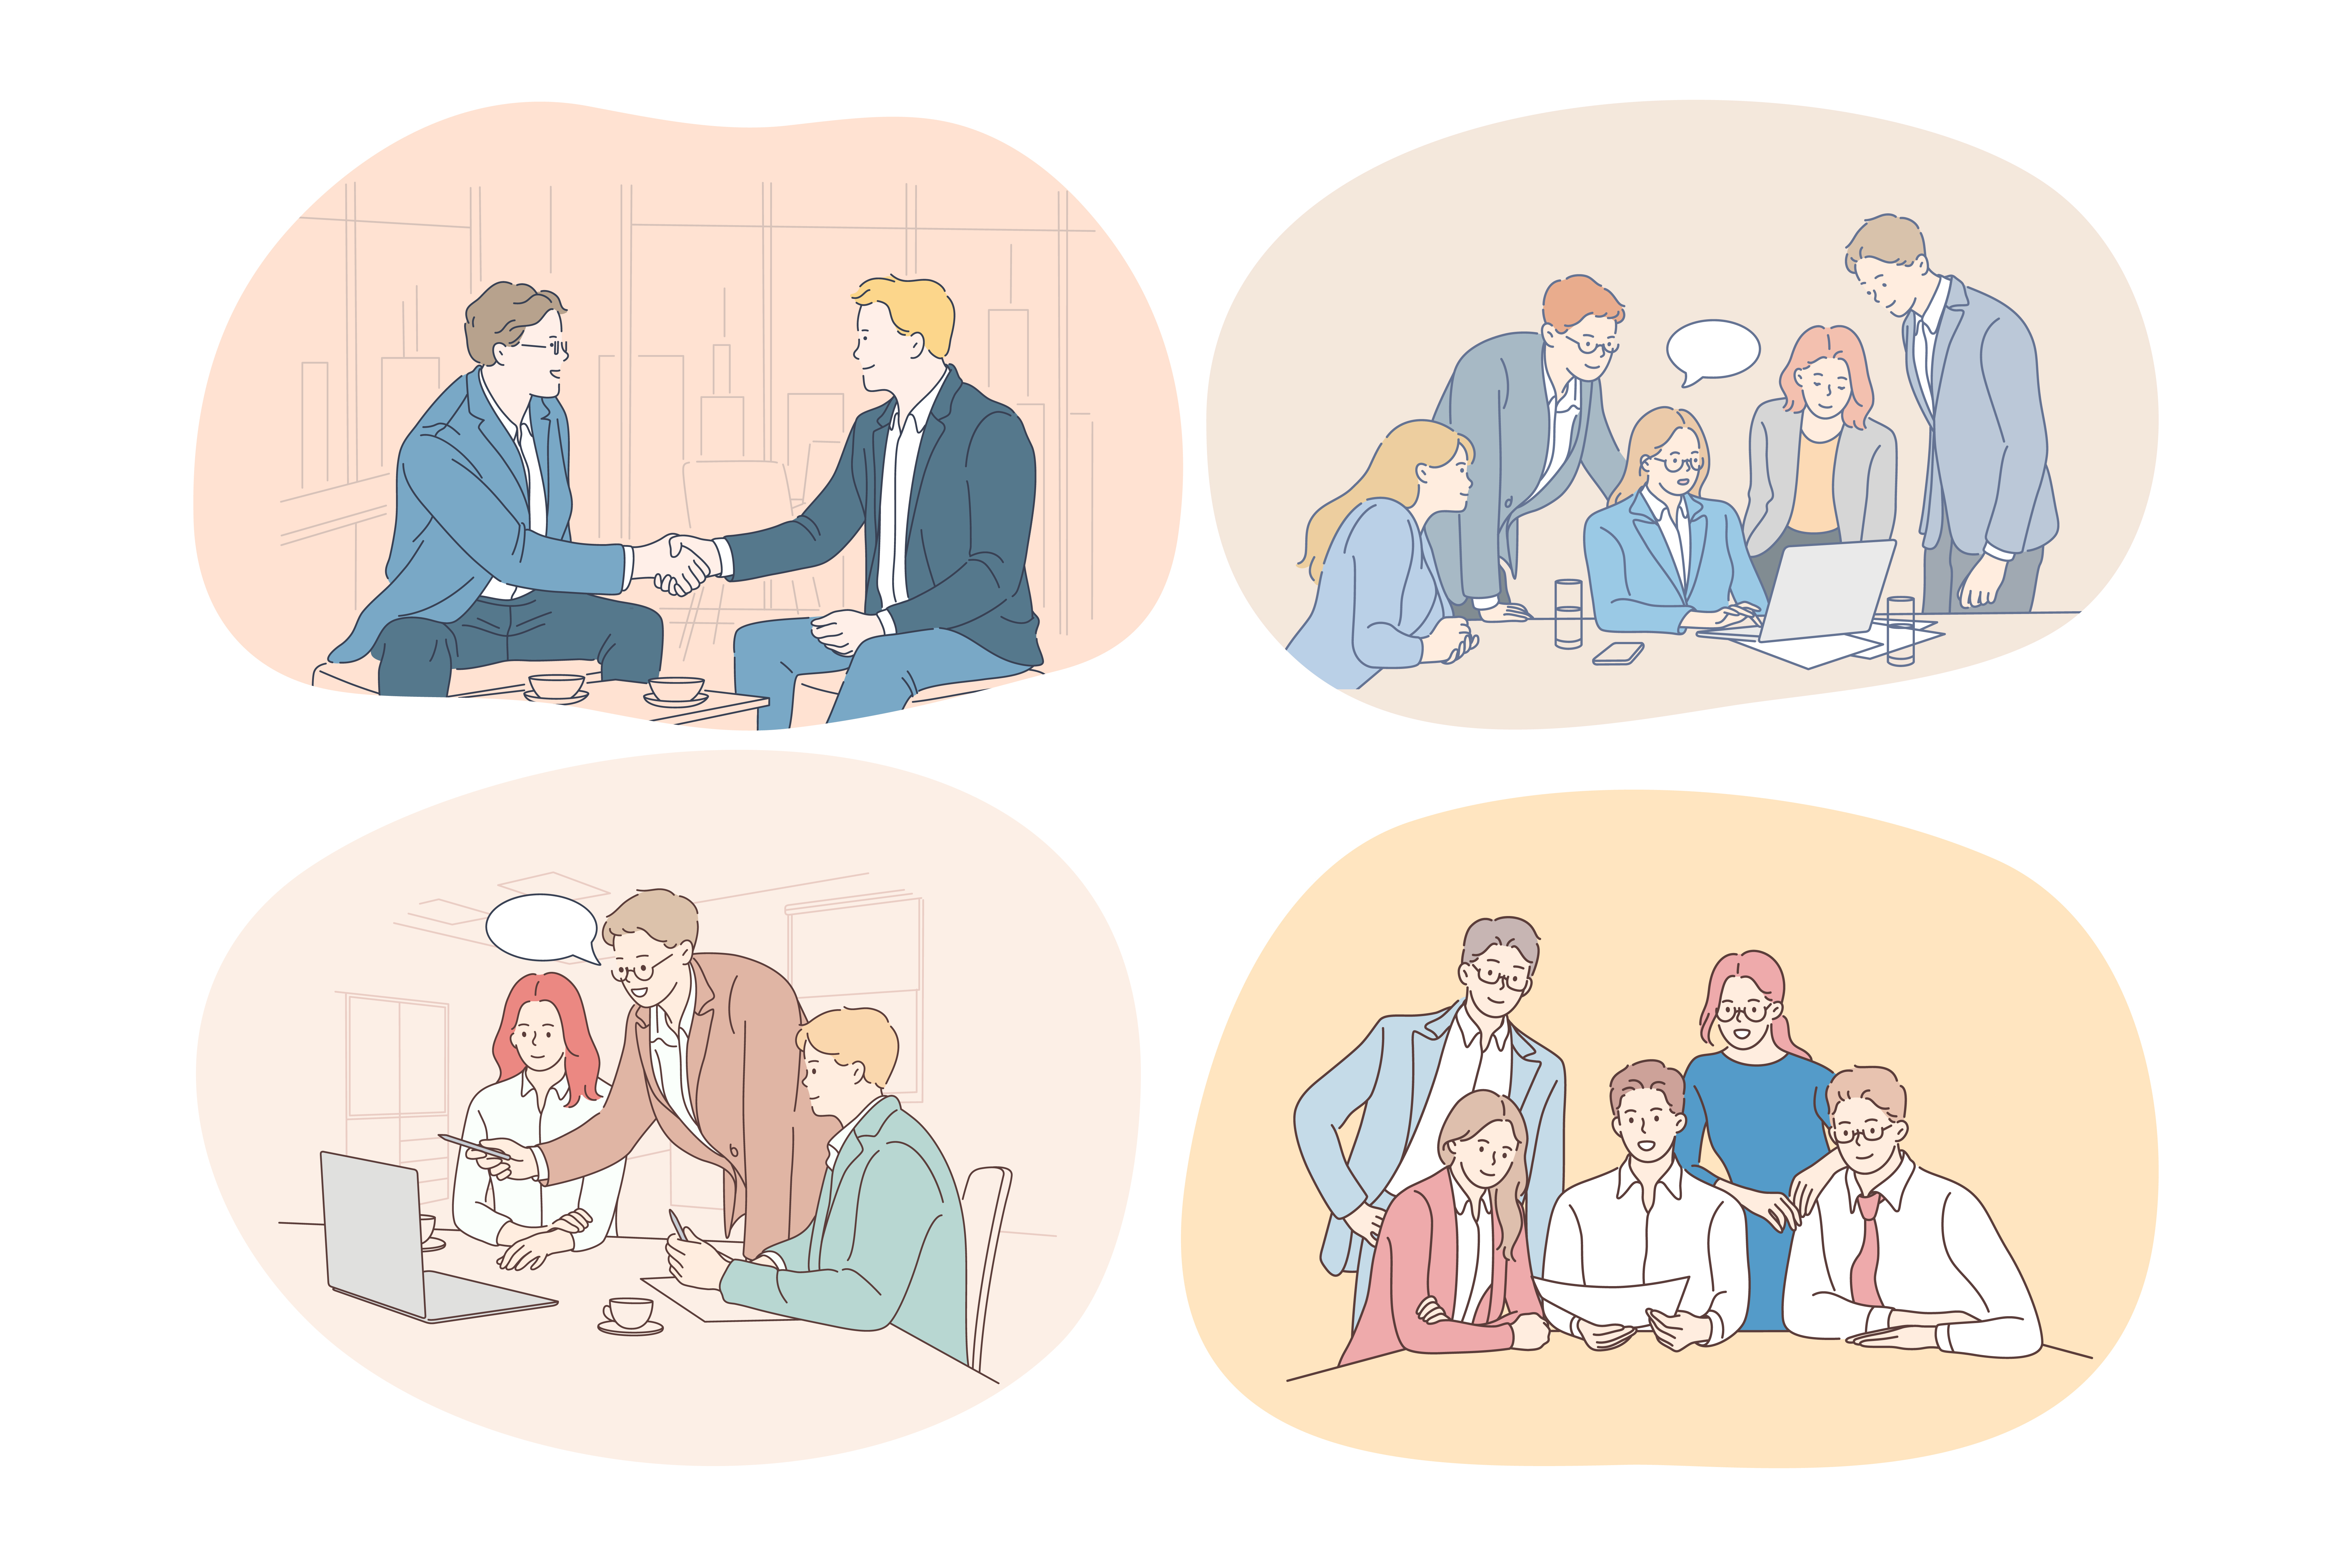 Teamwork business negotiations deal, office, agreement, cooperation concept. Business people partners coworkers discussing projects during brainstorming, arguing, making presentation together. Teamwork, business, negotiations, deal, office, agreement, cooperation concept